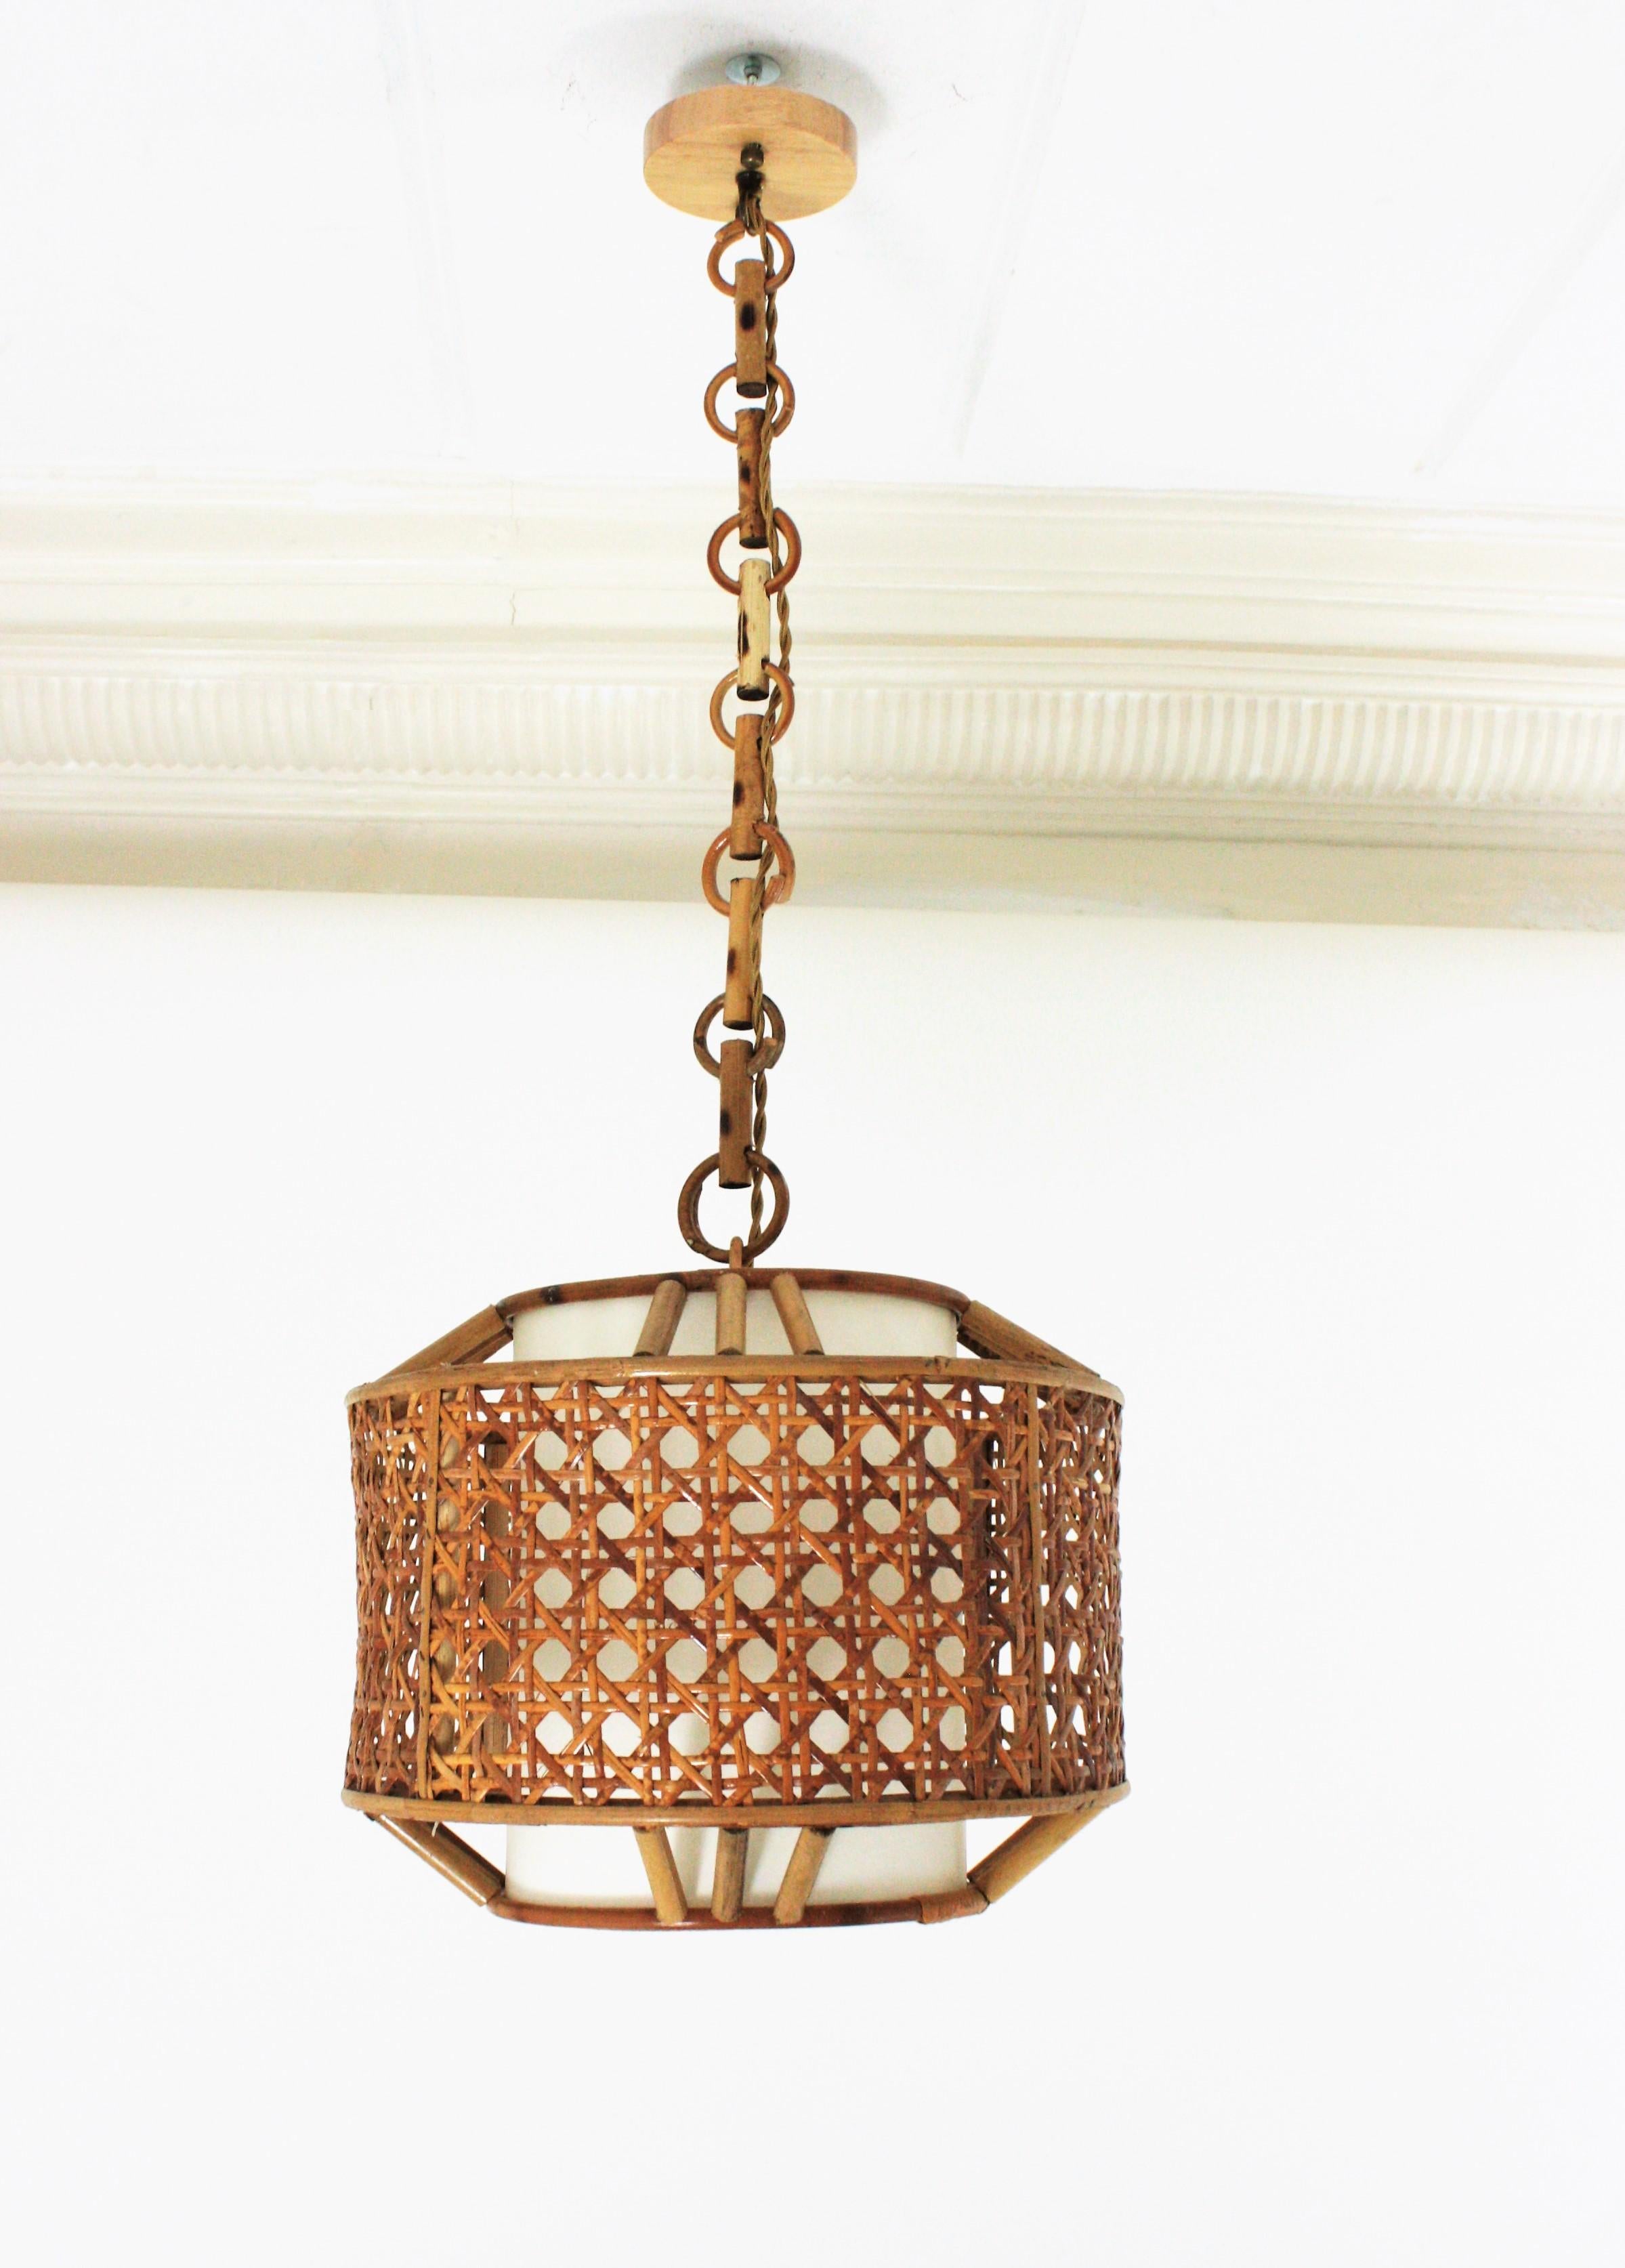 French Bamboo Rattan and Wicker Weave Drum Pendant Light or Lantern  For Sale